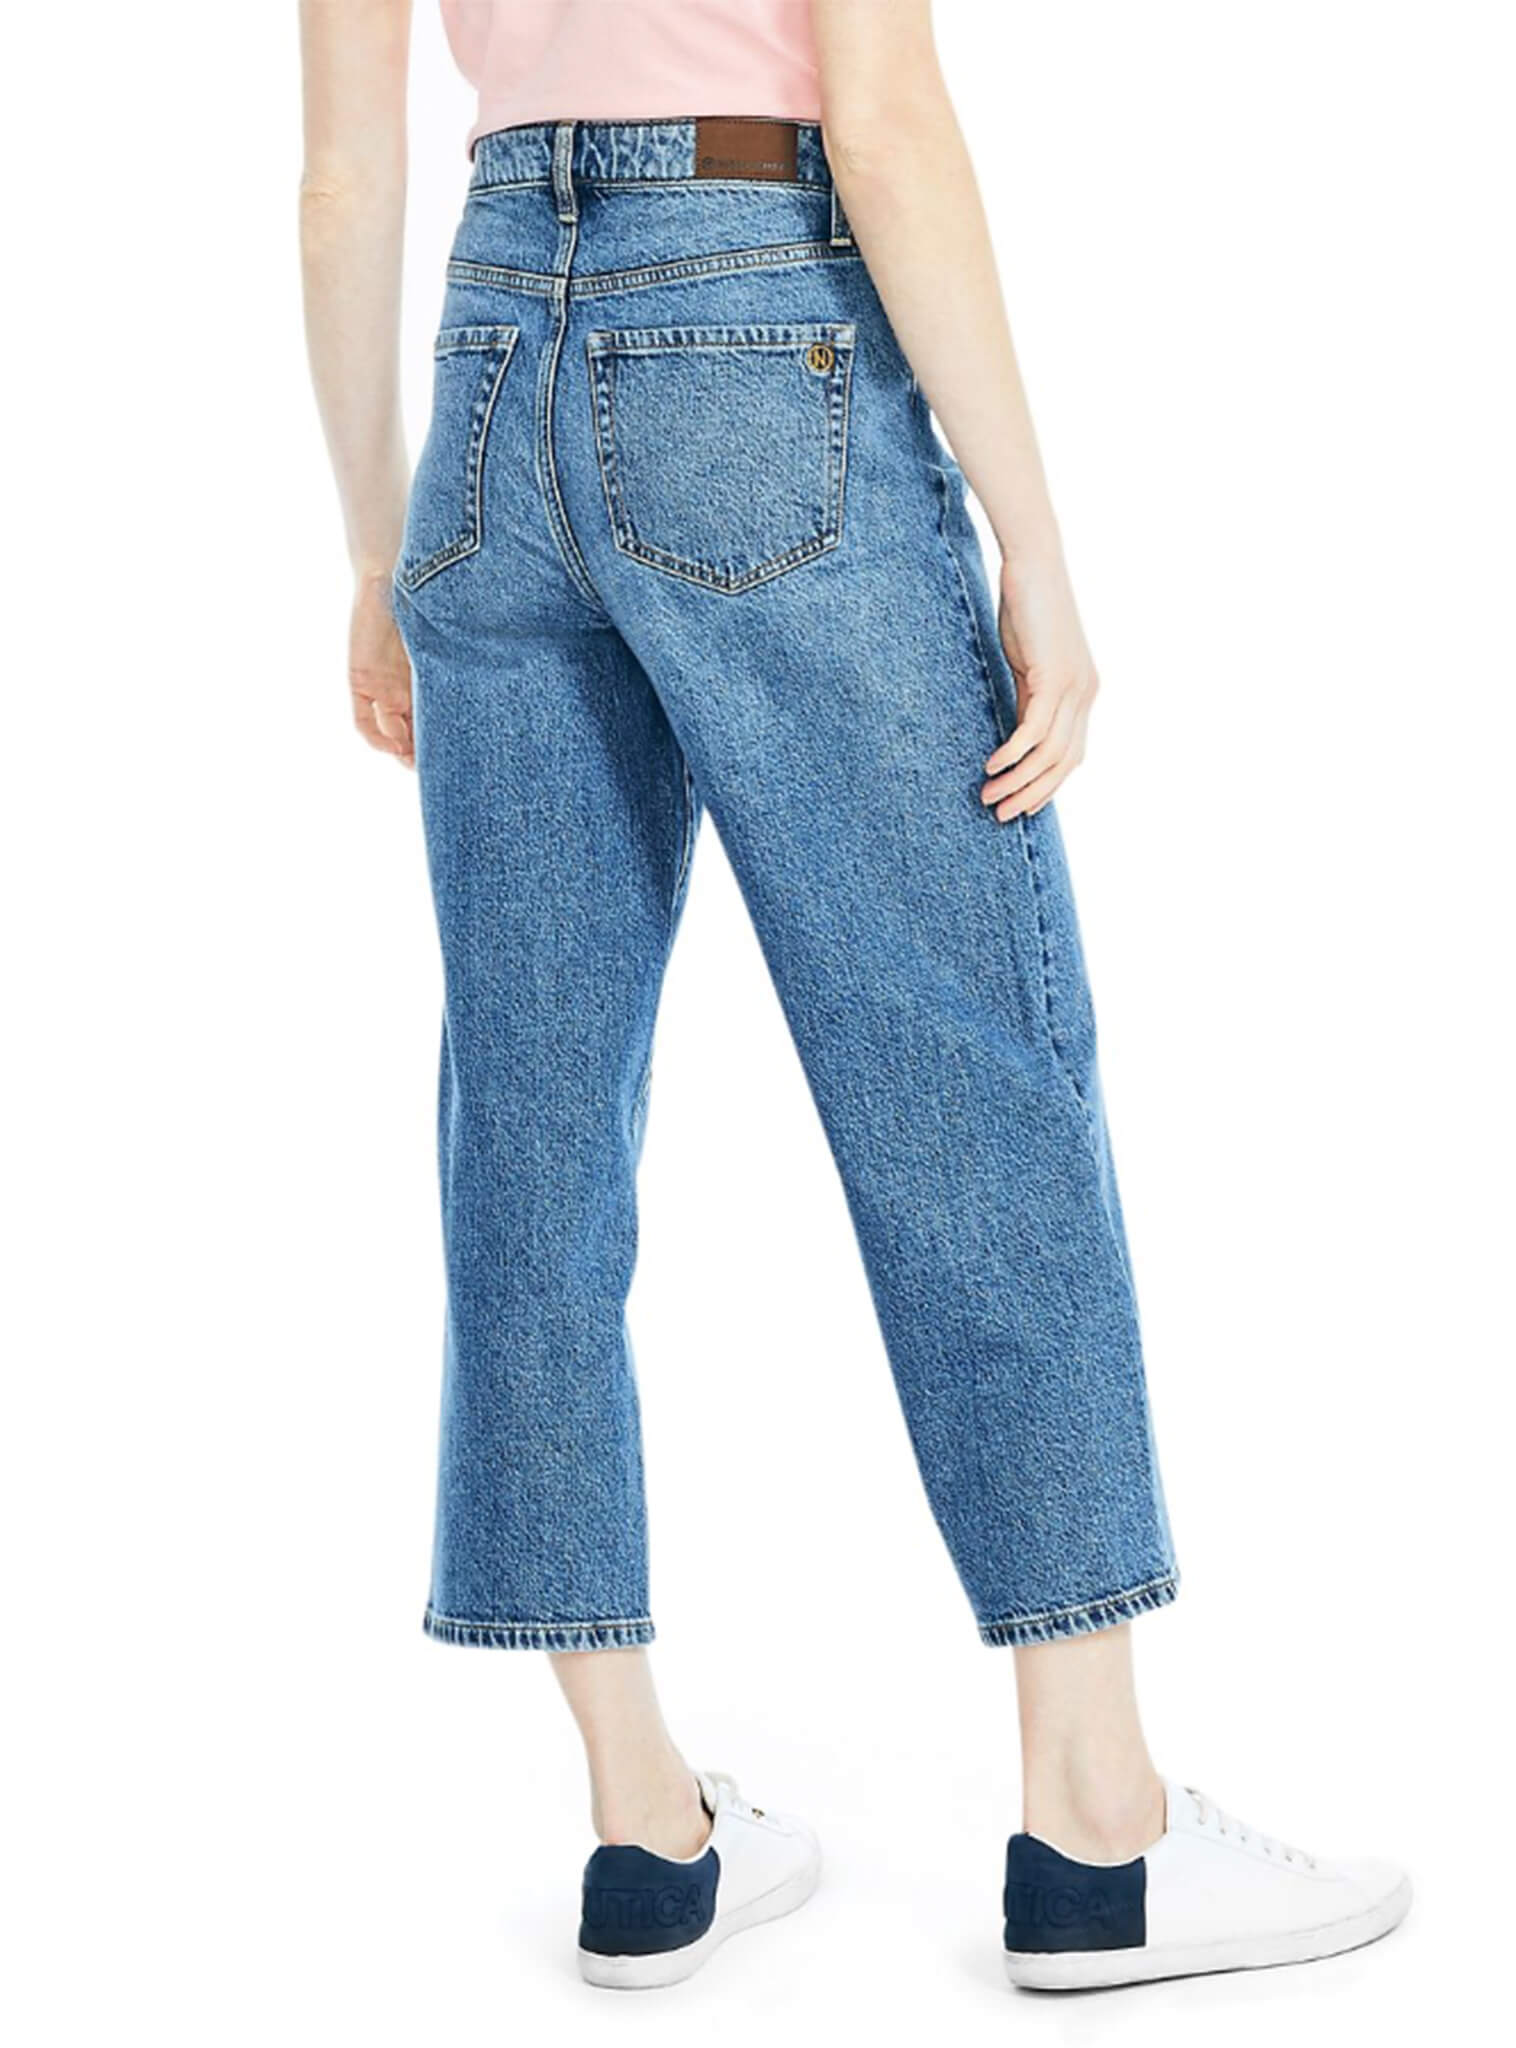 Jeans Tiro Alto Wide Leg Sustaibly Crafted Mujer